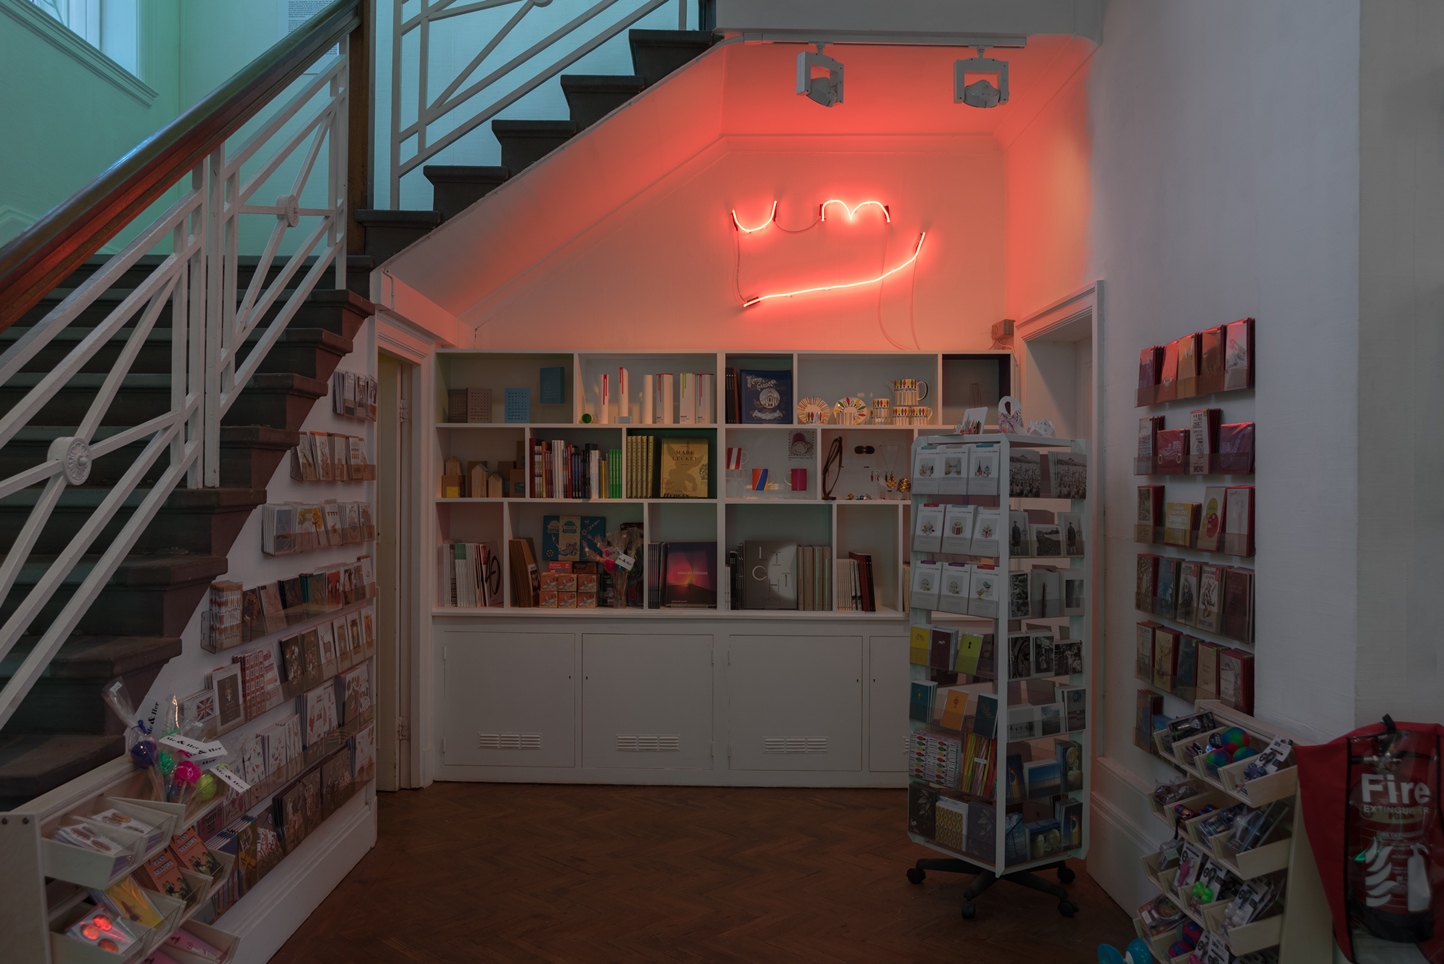 Shop area of The Grundy Art Gallery featuring a selection of cards and other items. above rear of shop area is a red neon artwork of letters and line, the letters say UM. The artwork is by artist Noel Clueit, and it responds to a similar neon artwork on permanent display over The Grundy Art Galleries entrance doorway.